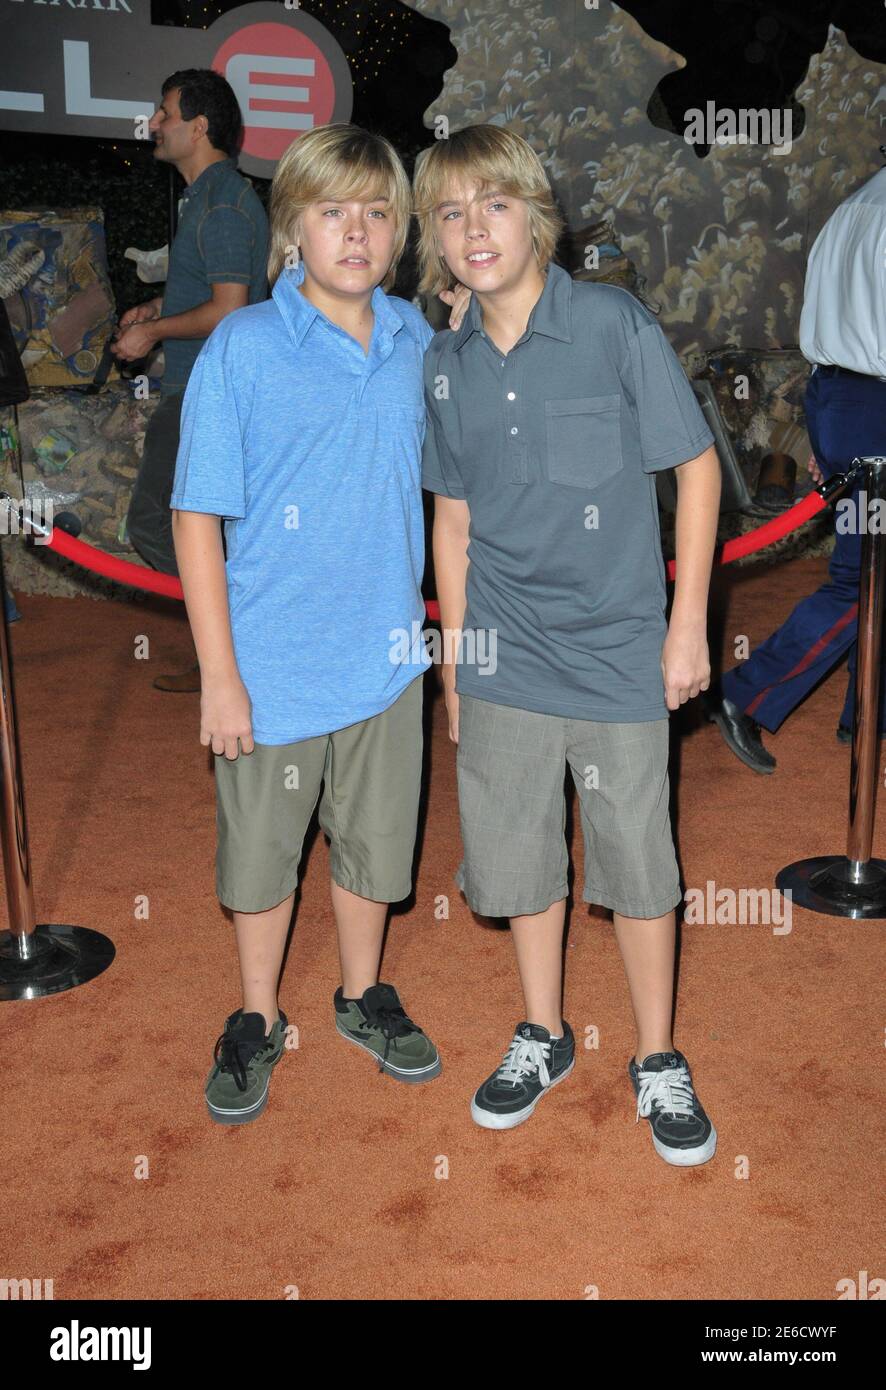 Dylan Sprouse and Cole Sprouse at the World premiere of Wall-E held at the Greek Theater in Griffith Park.CA..06,21,08 Stock Photo